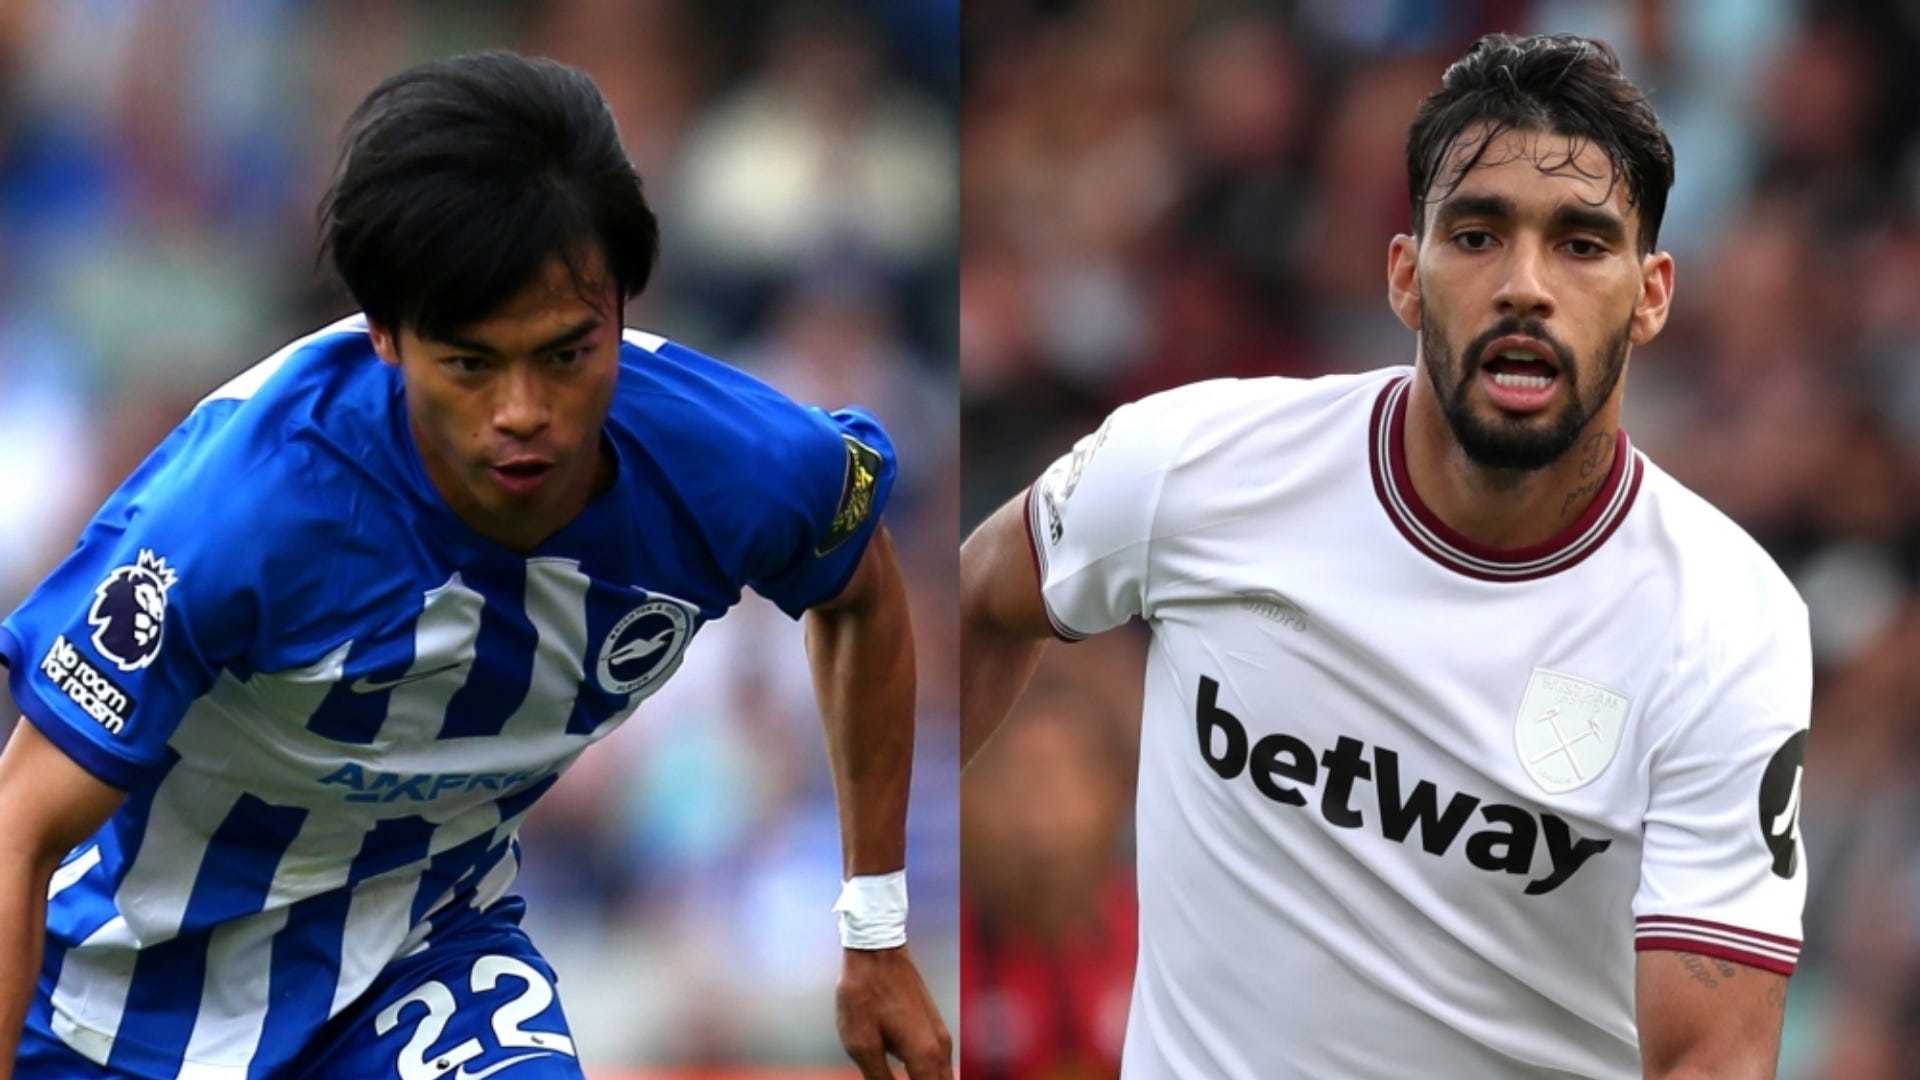 Brighton vs West Ham Live stream, TV channel, kick-off time and where to watch Goal UK